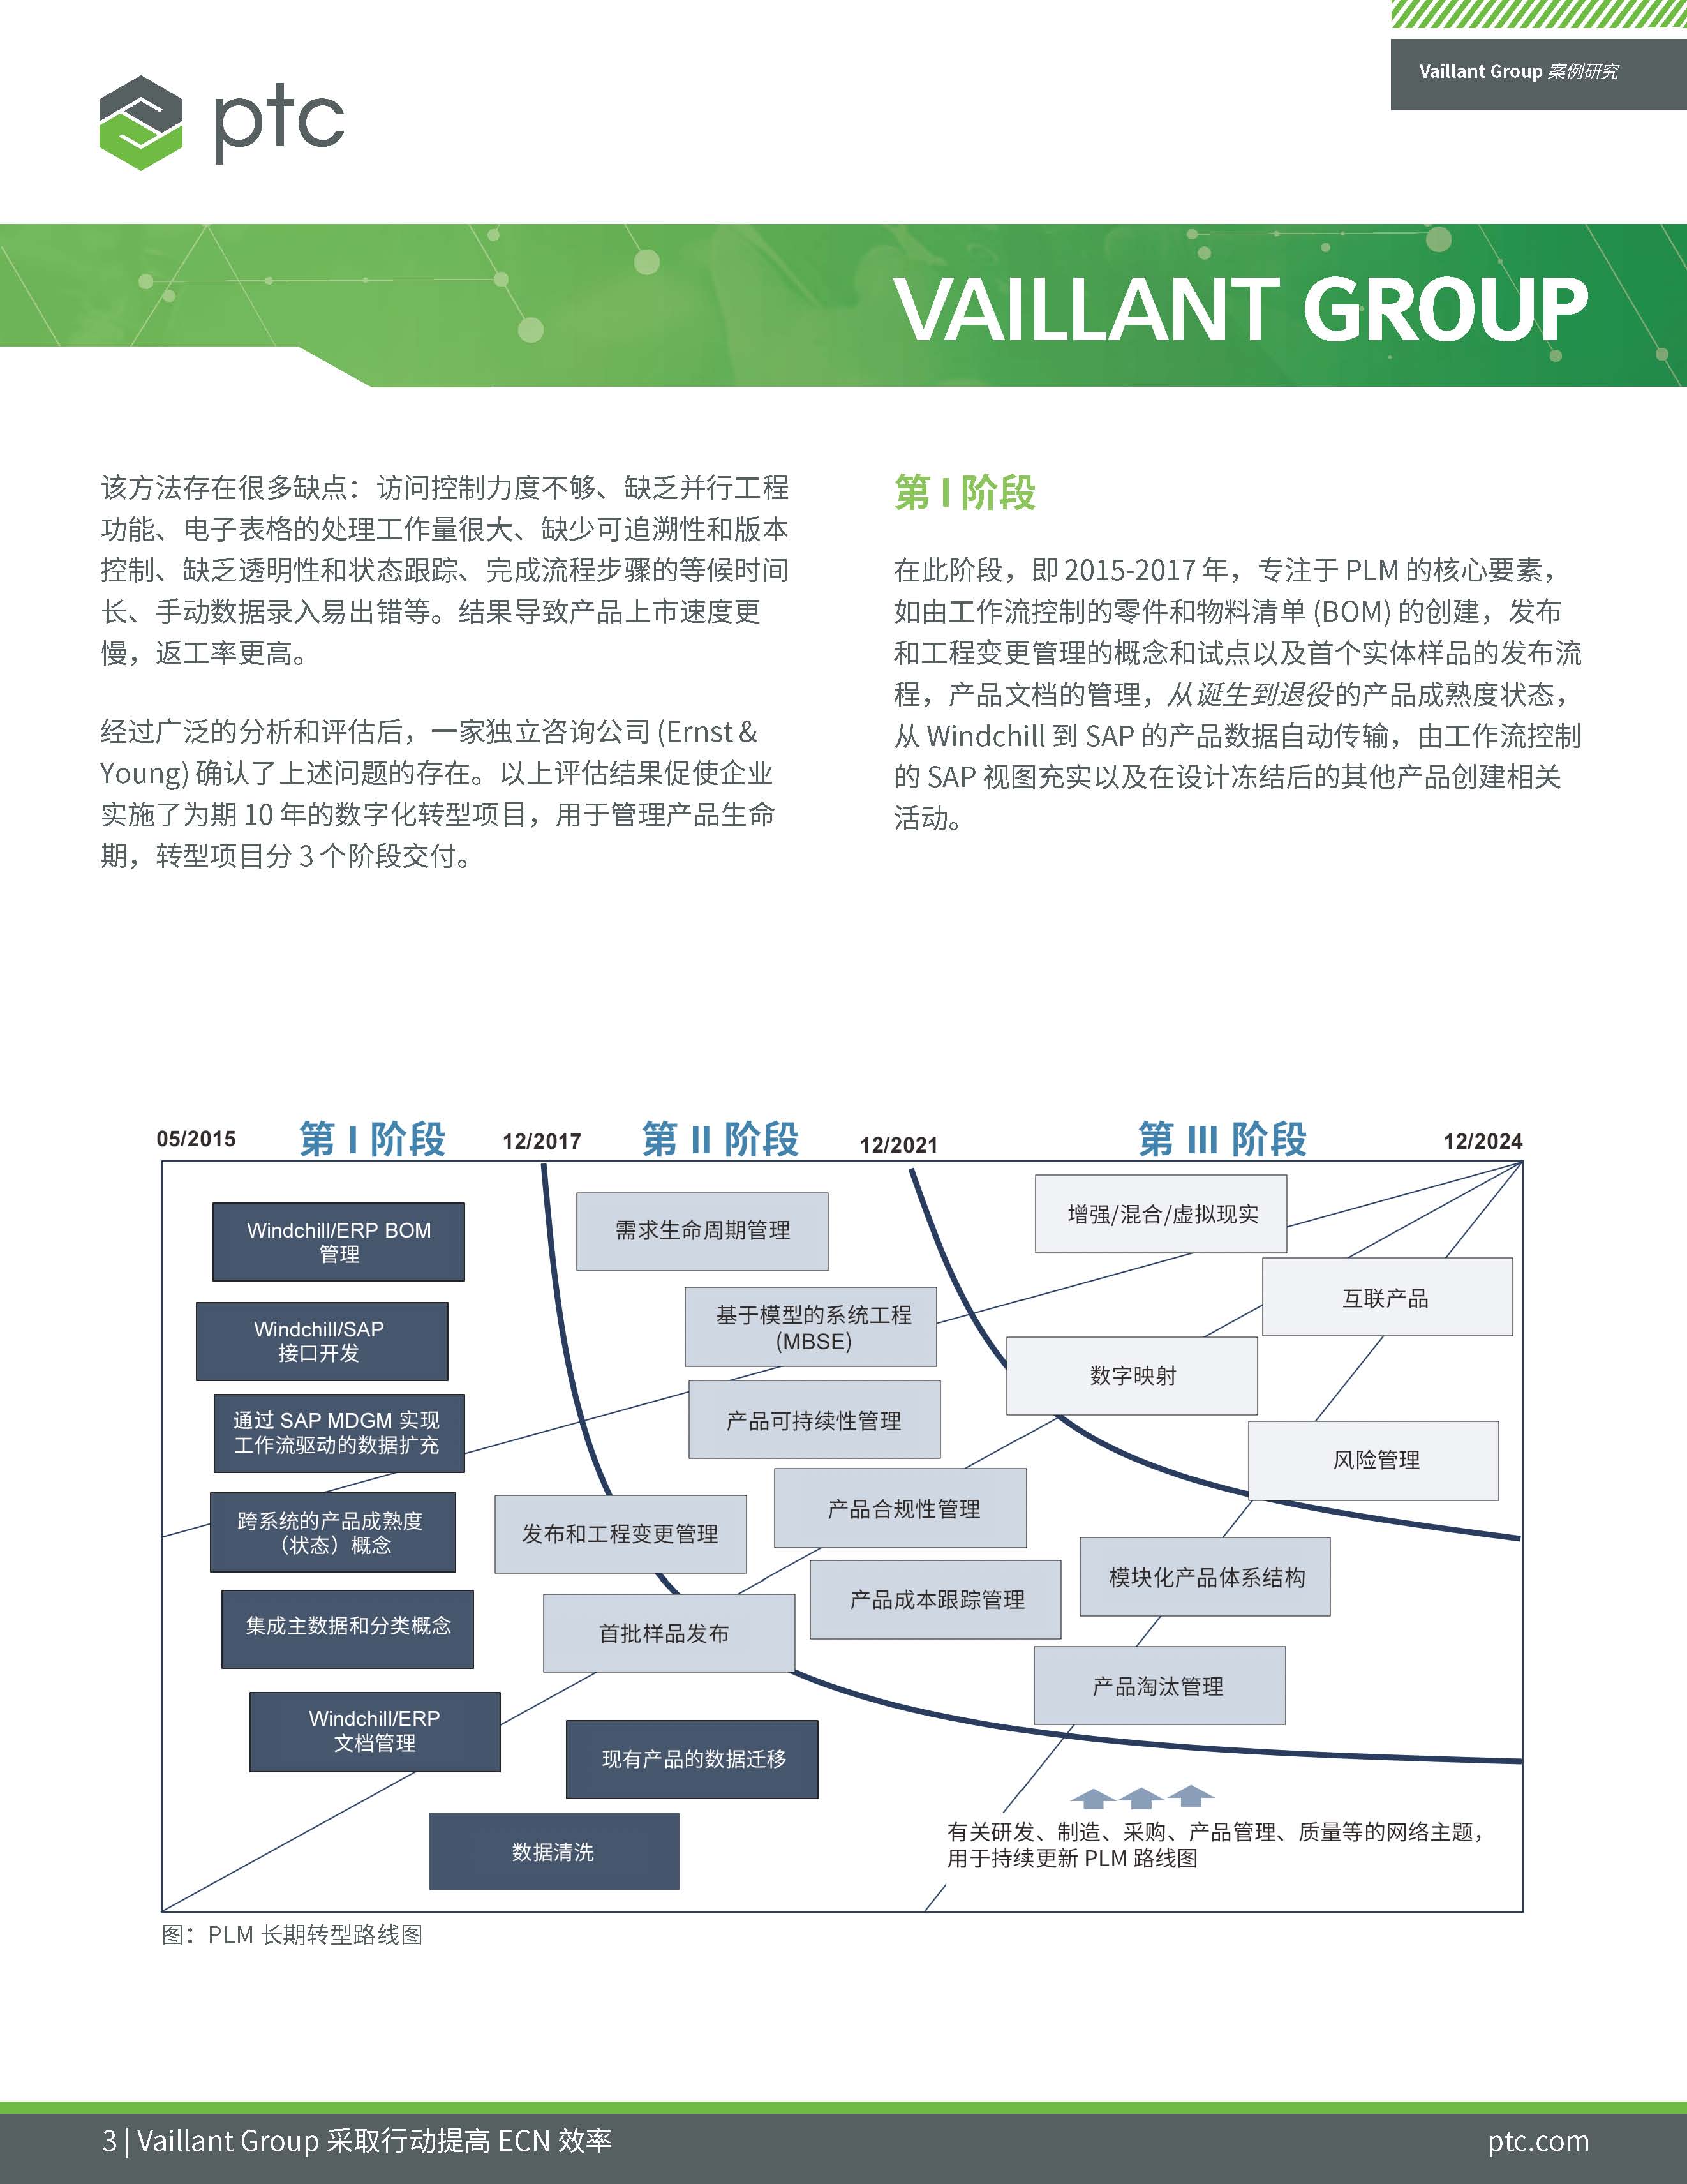 Vaillant Group's Digital Transformation (Chinese)_页面_03.jpg